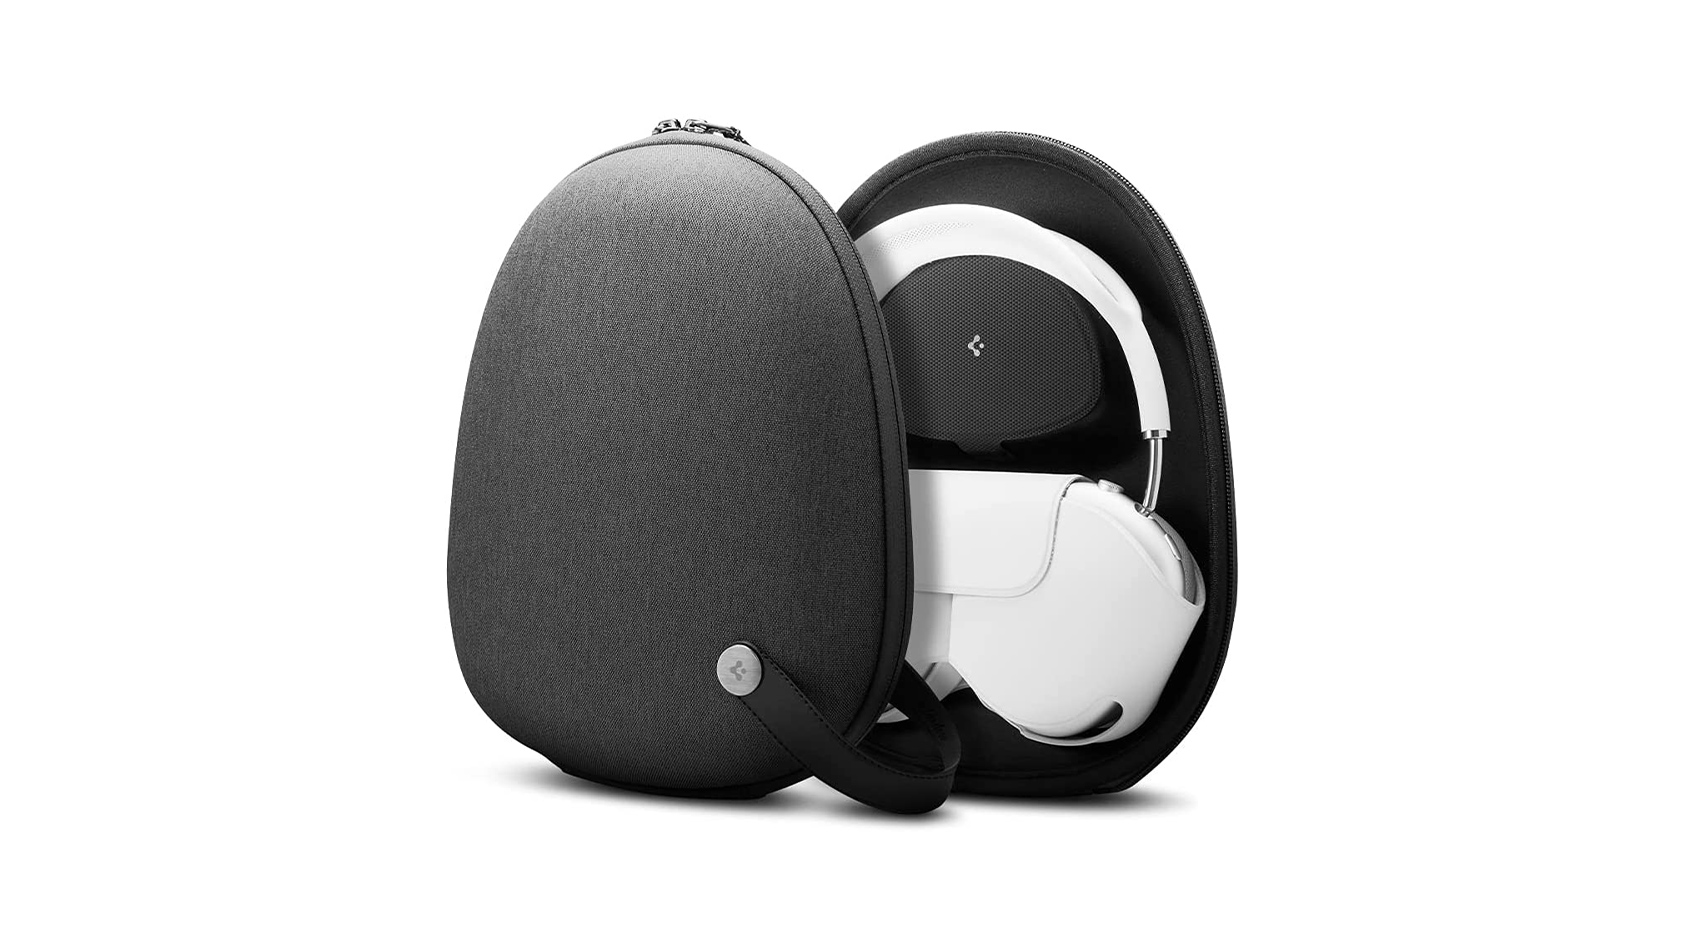 The Spigen Klasden AirPods Max Carrying Case in black with the AirPods Max and Apple Smart Case inside.